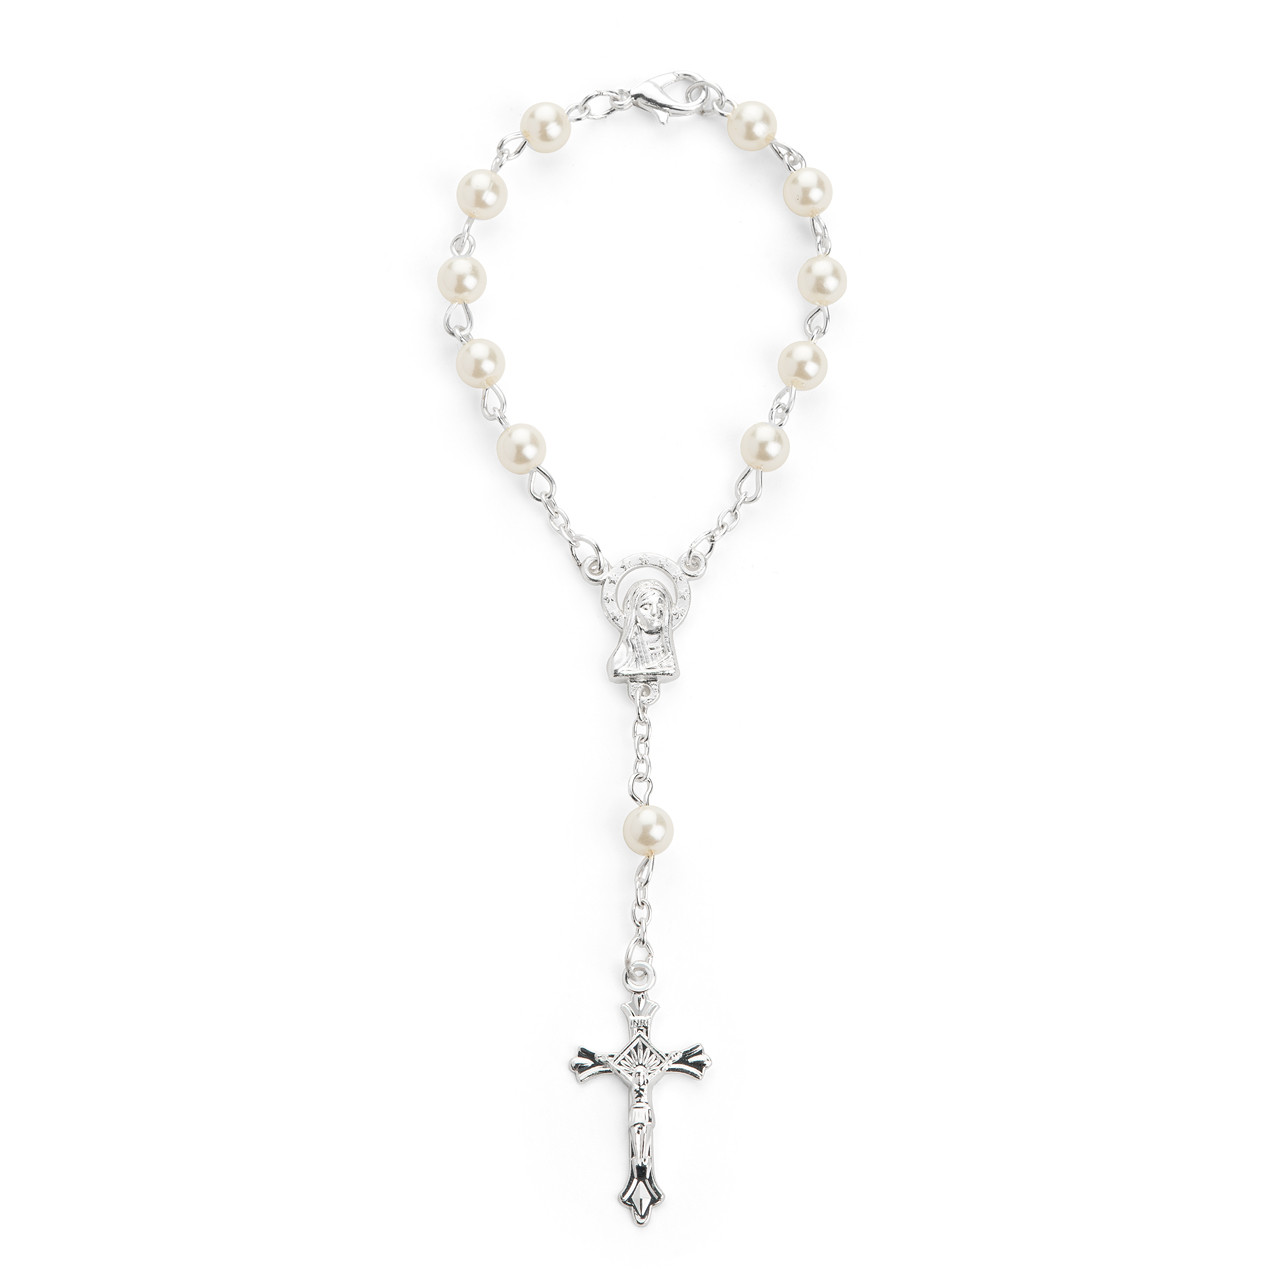 Rosary Bracelet with imitation Pearl Bead Silver Plated Chain